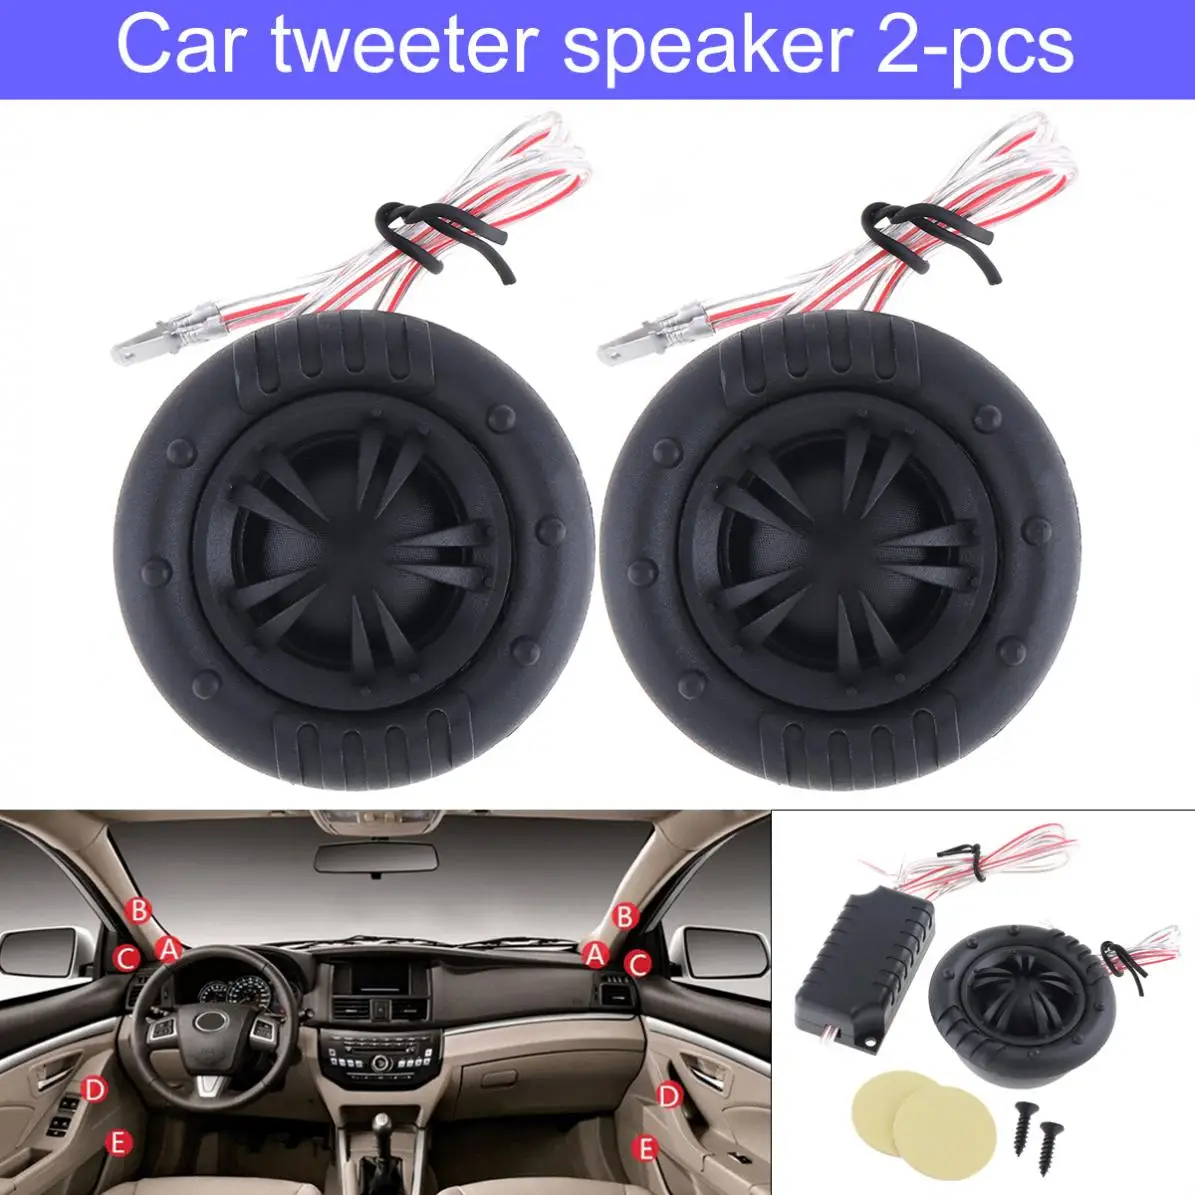 

2pcs 150W YH-X6 High Efficiency 29mm Mylar Half-Dome Tweeter Speakers for Car Audio Systems